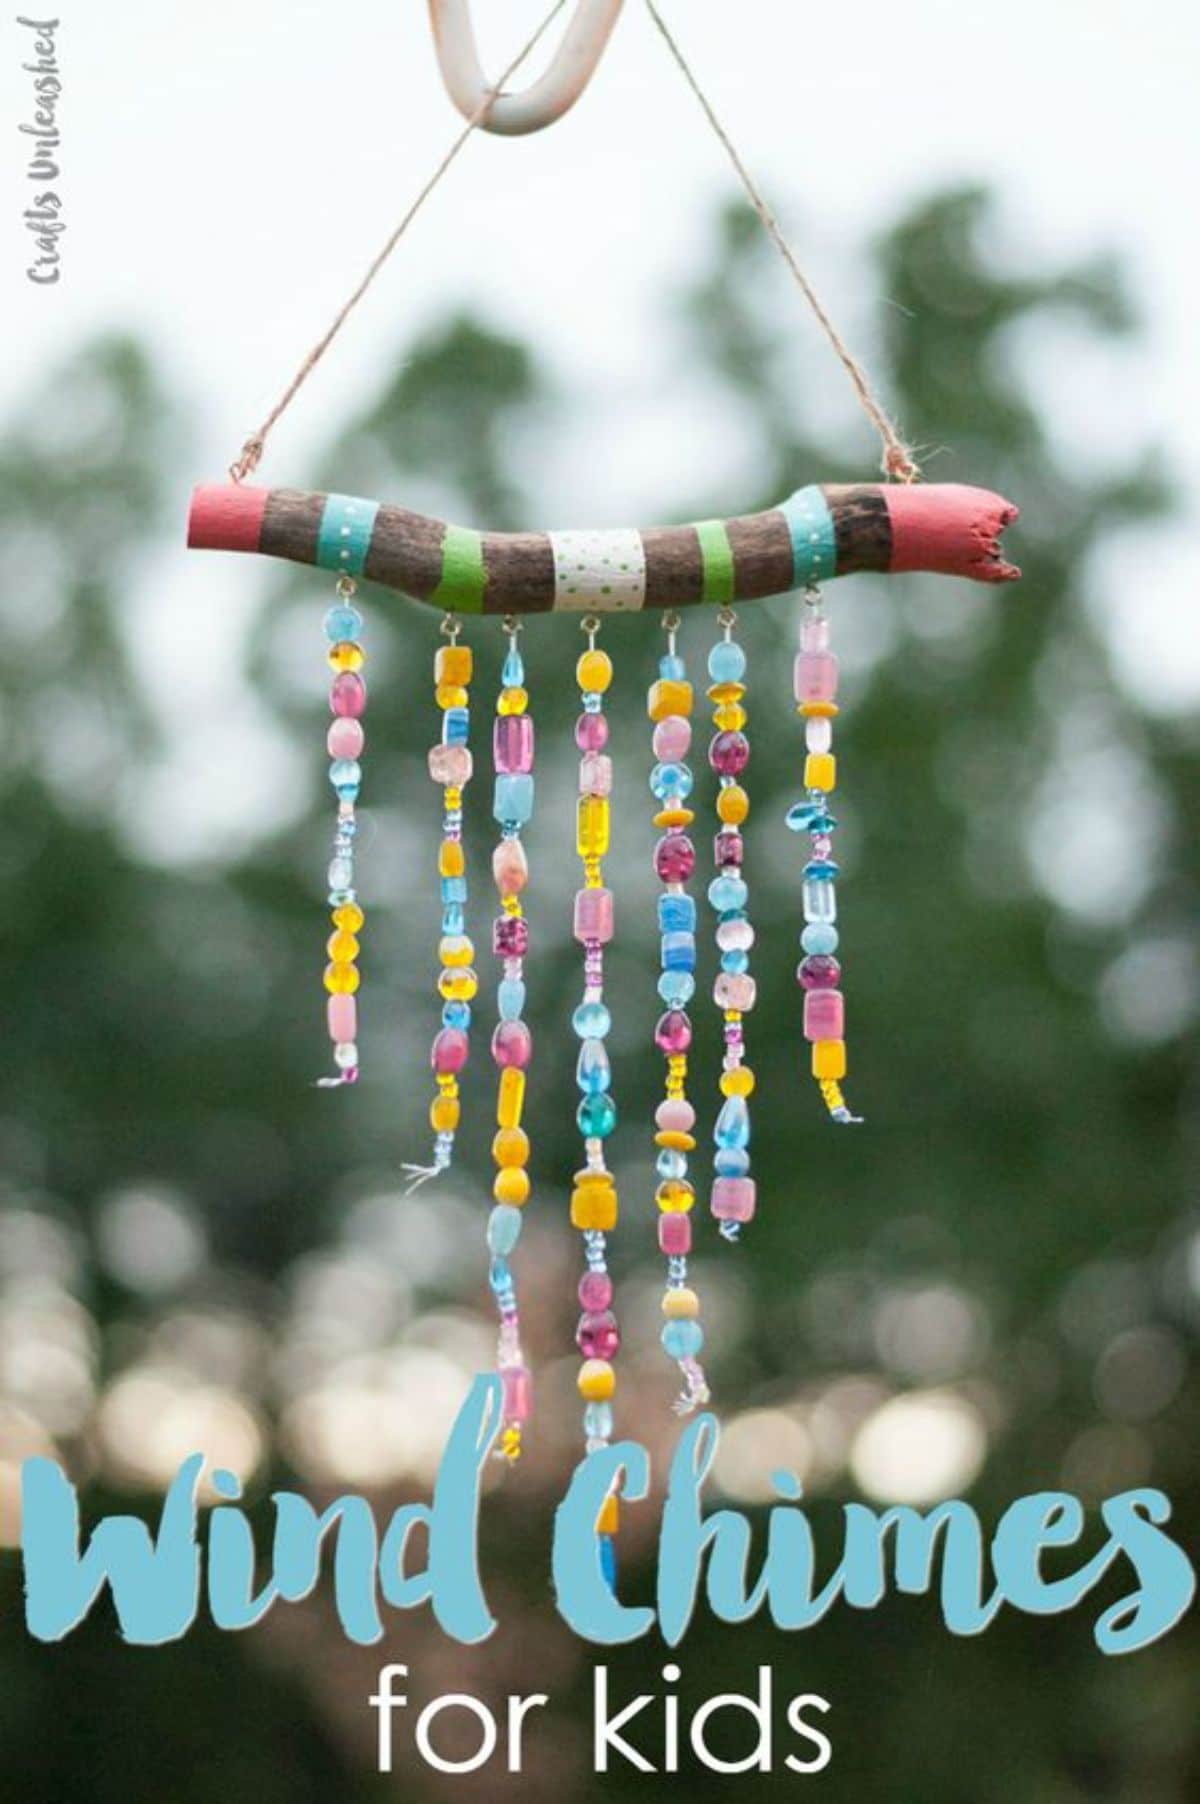 the text reads "Wind Chimes for kids" the image is of a eind chime made of twigs, string and beads